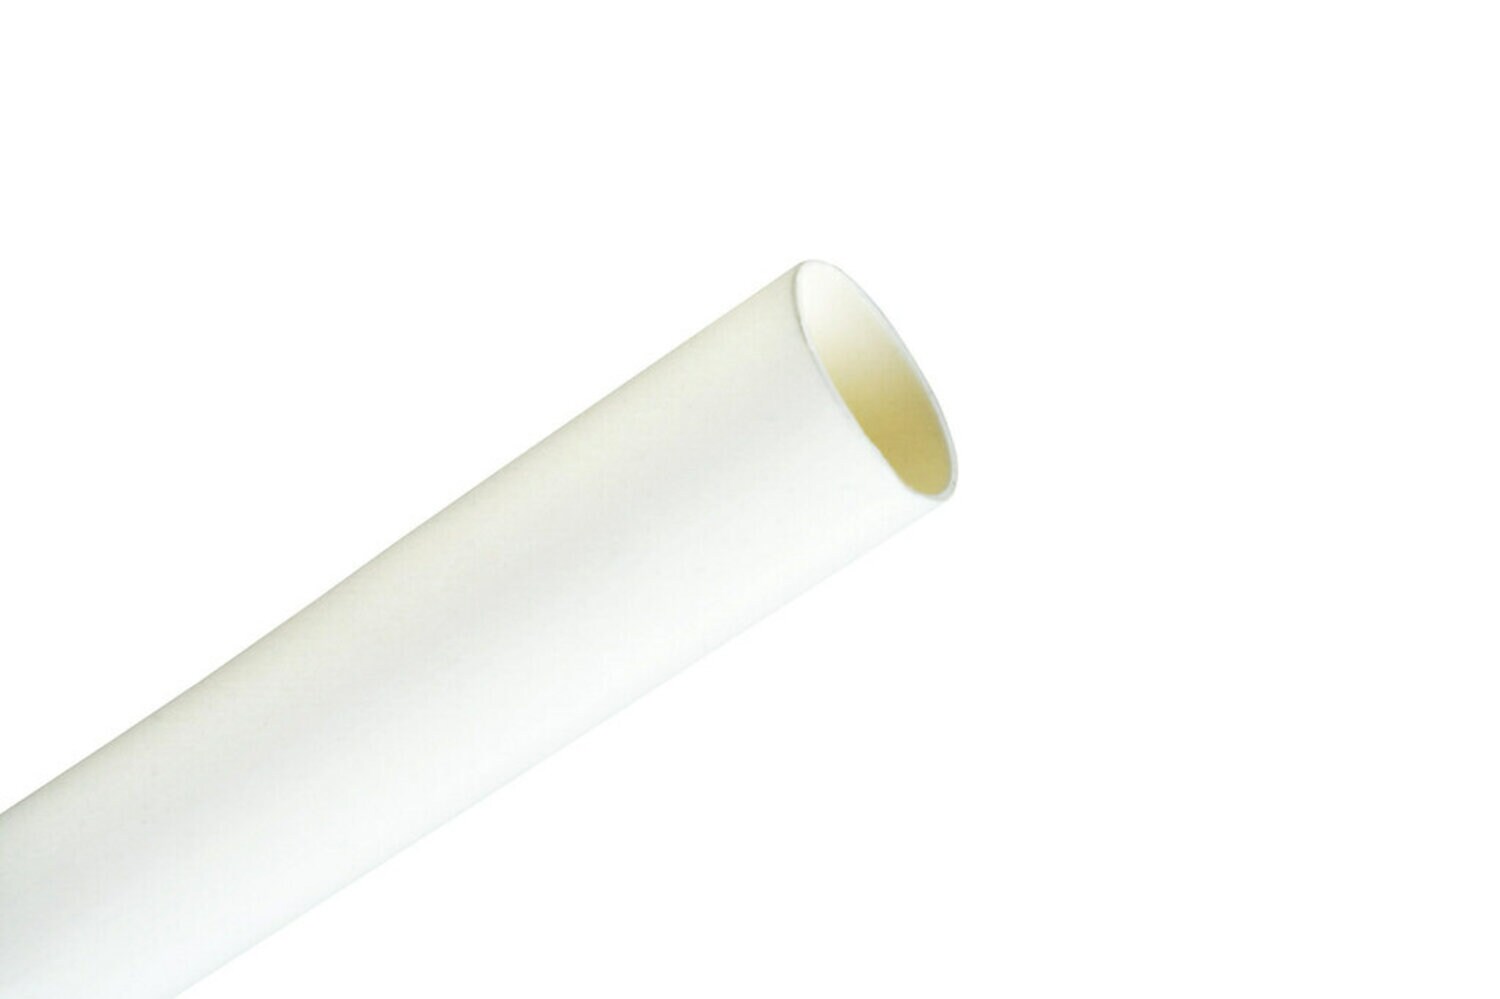 7010351715 - 3M Heat Shrink Thin-Wall Tubing FP-301-3/32-48"-White-250 Pcs, 48 in
Length sticks, 250 pieces/case